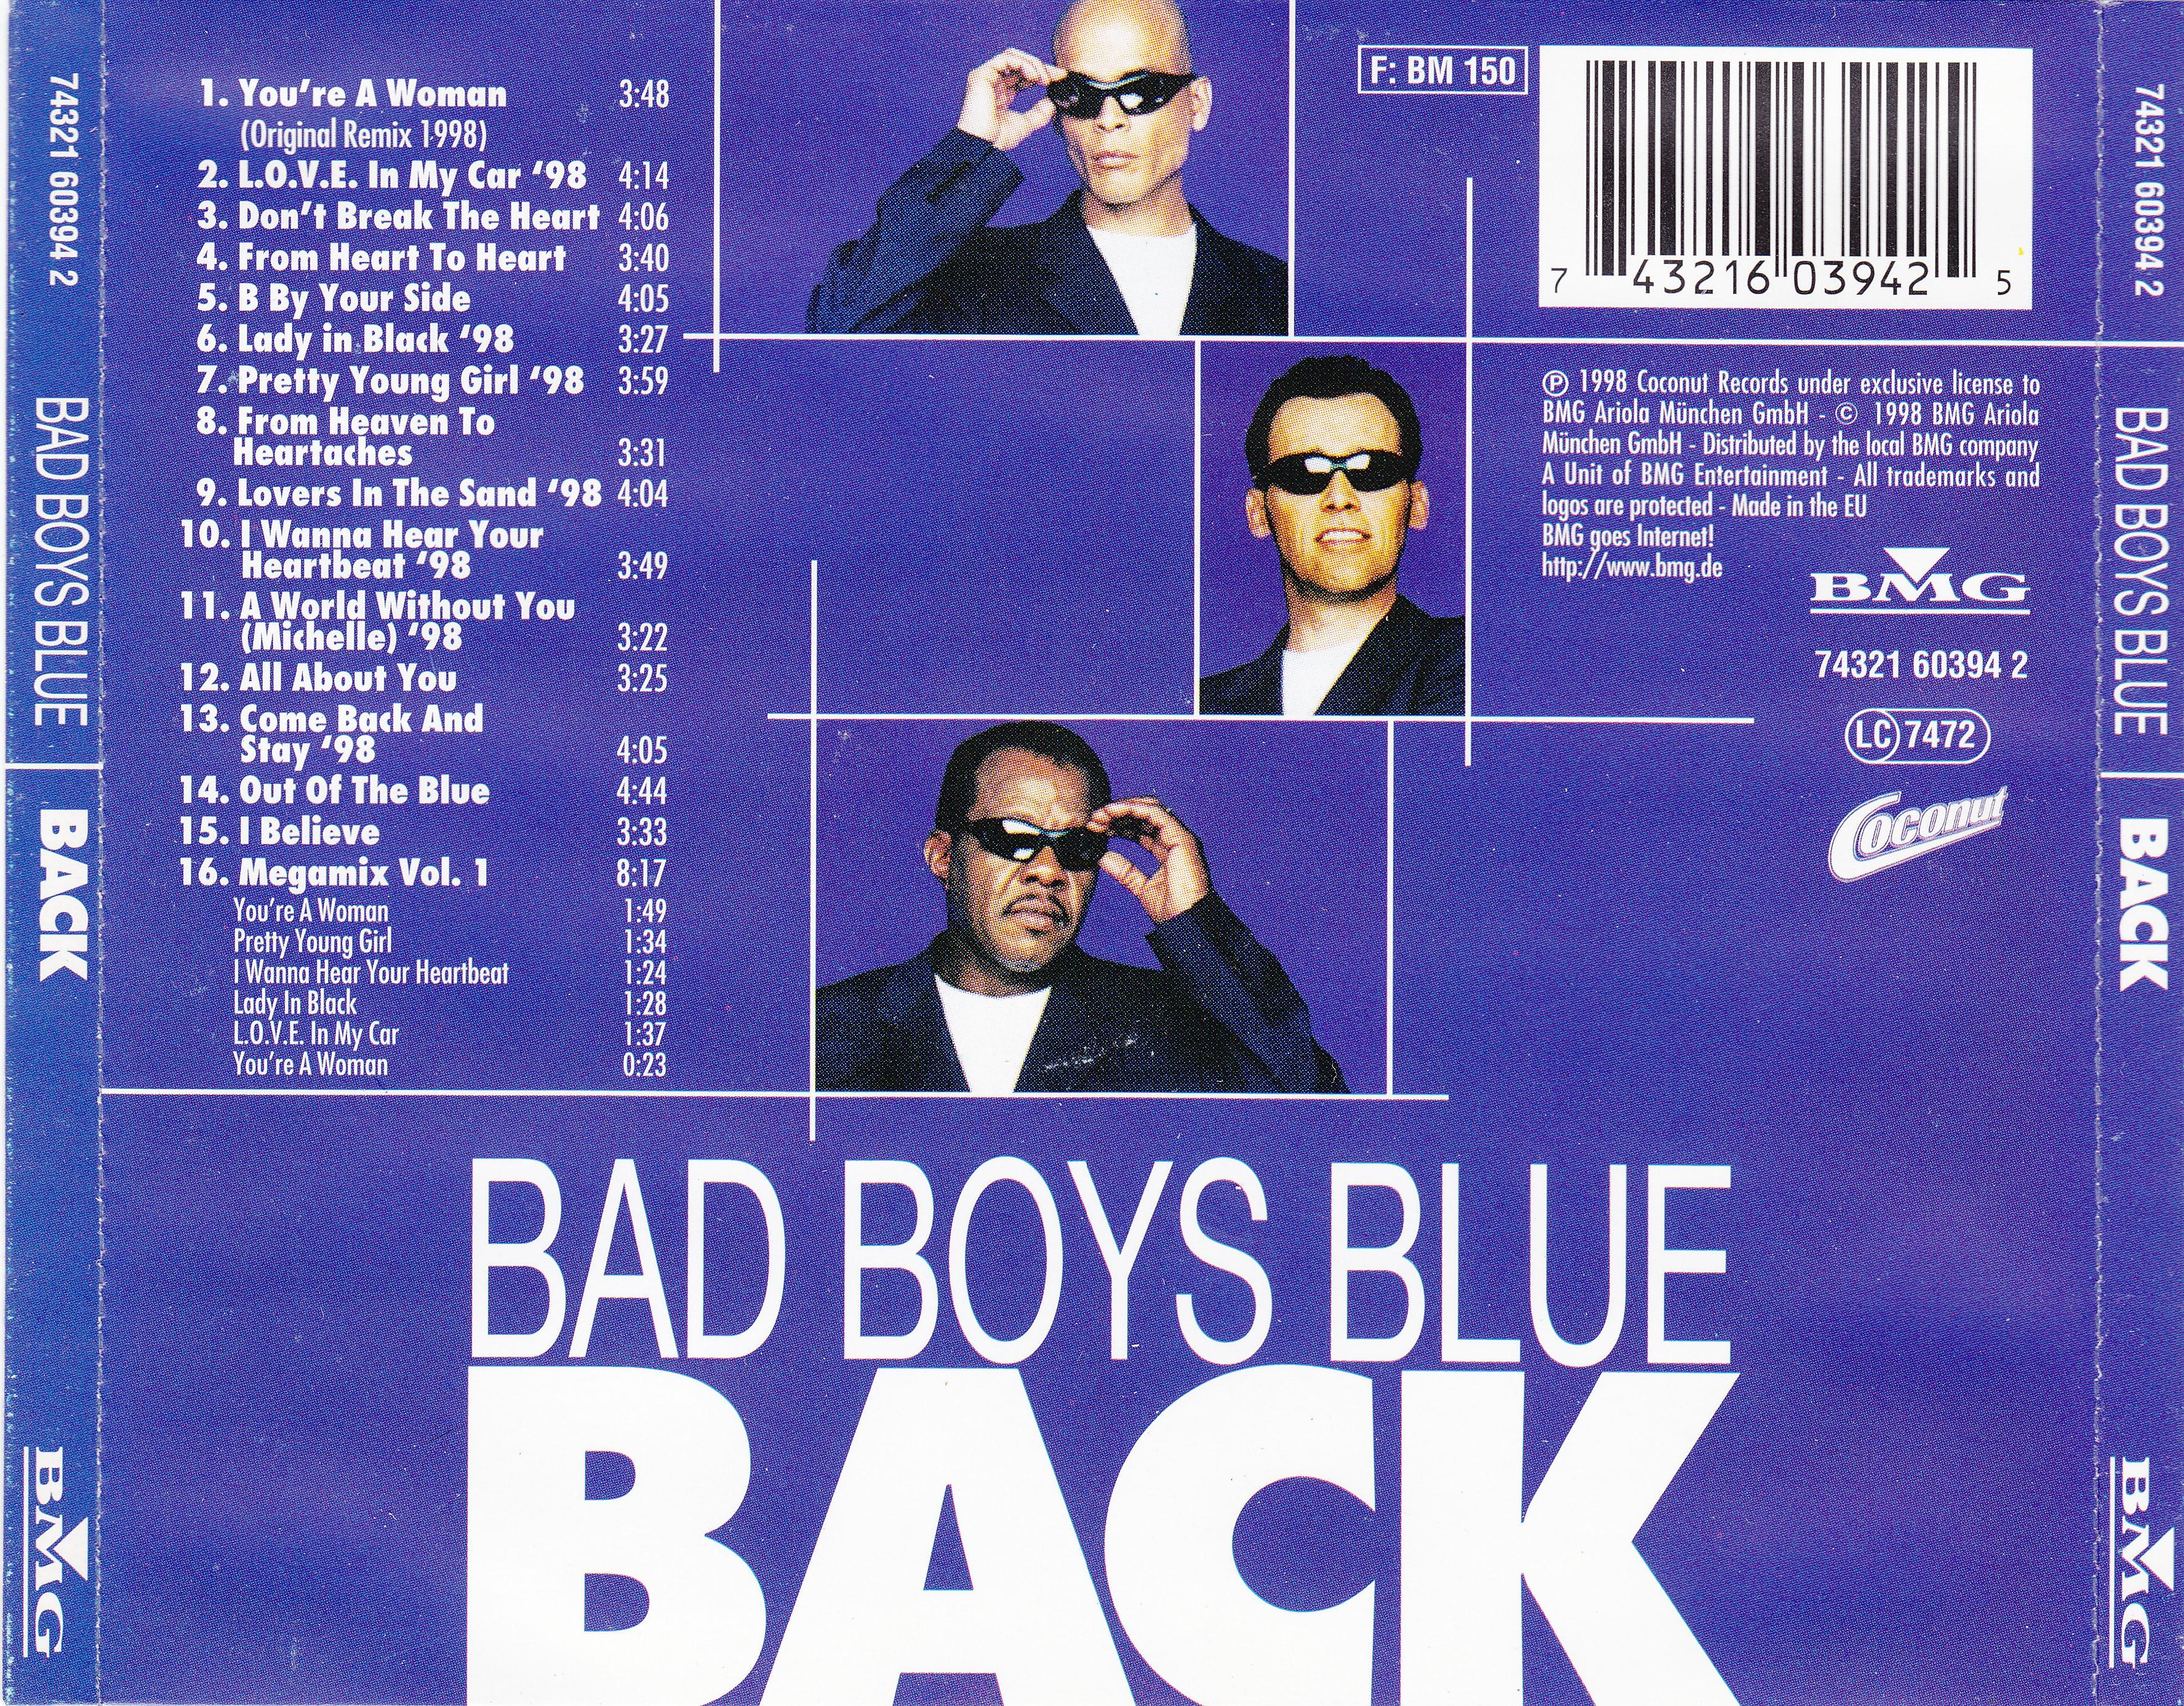 Bad Boys Back : Back CD Covers Cover Century | 500.000 Album Art covers for free